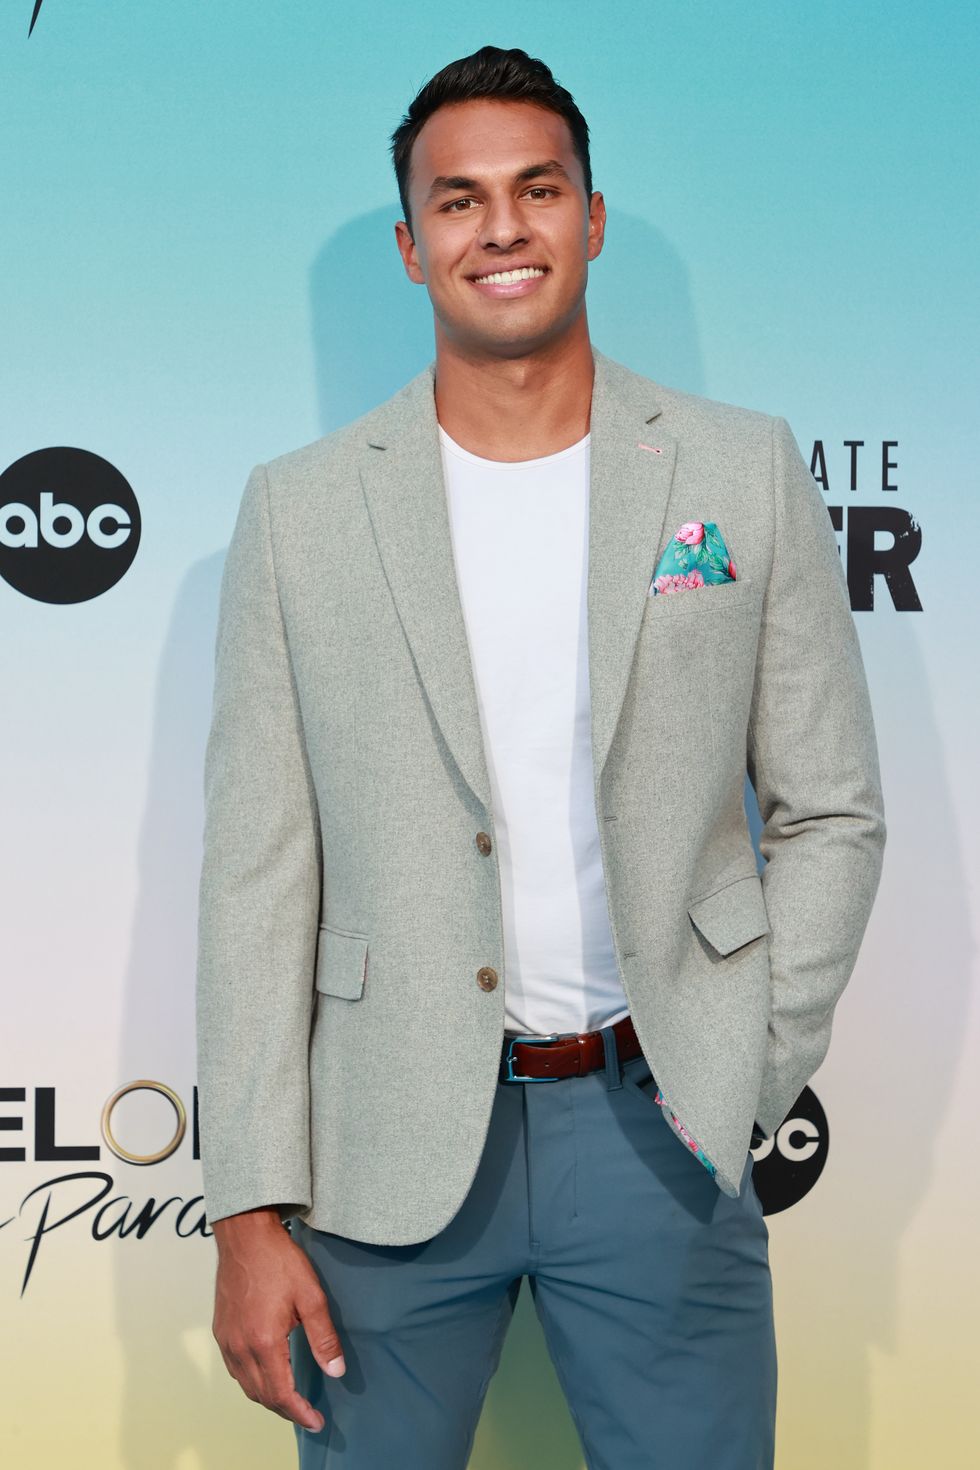 abc's "bachelor in paradise" and "the ultimate surfer" premiere